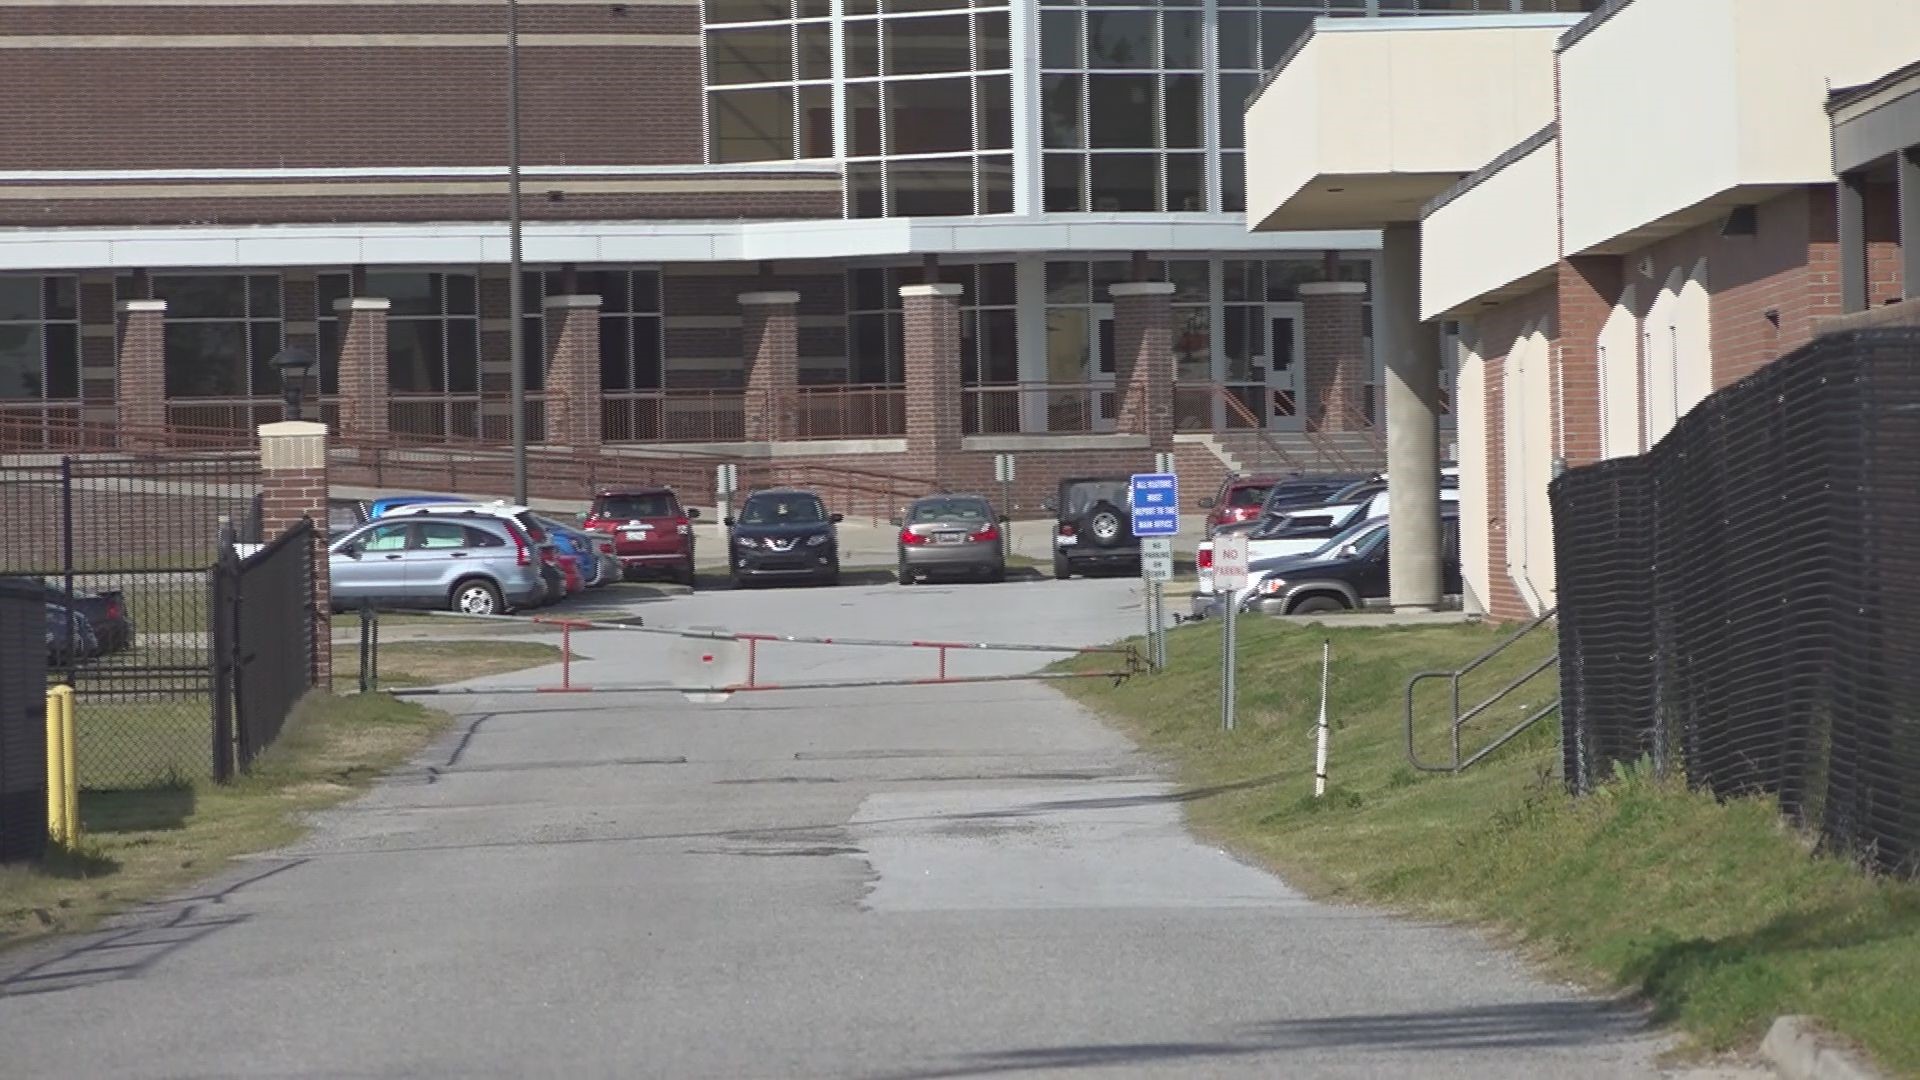 The student had just parked his car in an access lot off of an on-campus access road and was heading to his 1st period class at the Lexington Technology Center.